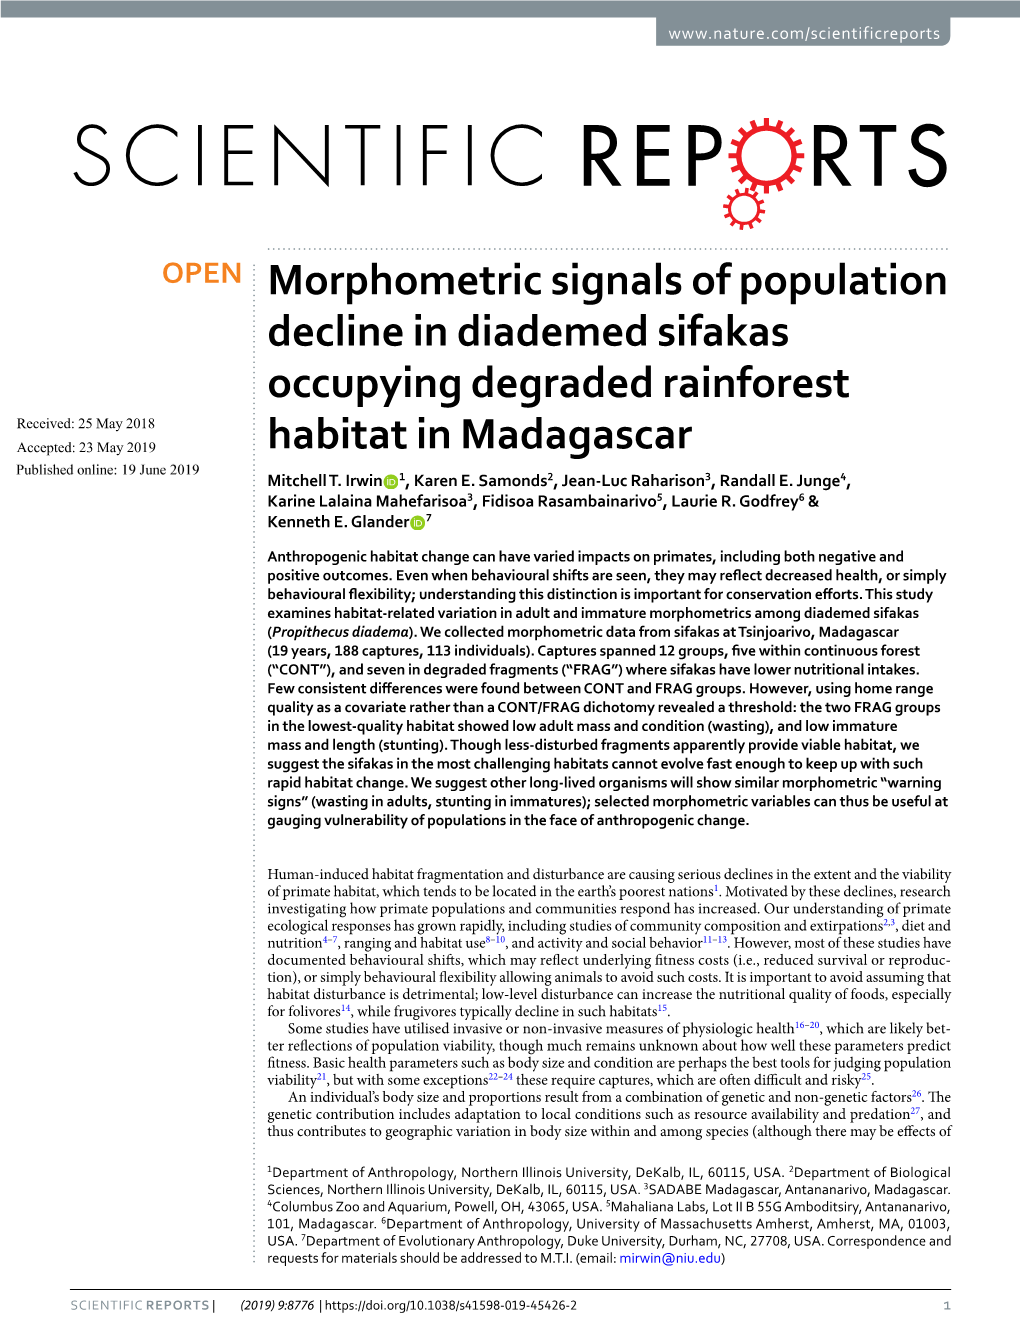 Morphometric Signals of Population Decline in Diademed Sifakas Occupying Degraded Rainforest Habitat in Madagascar